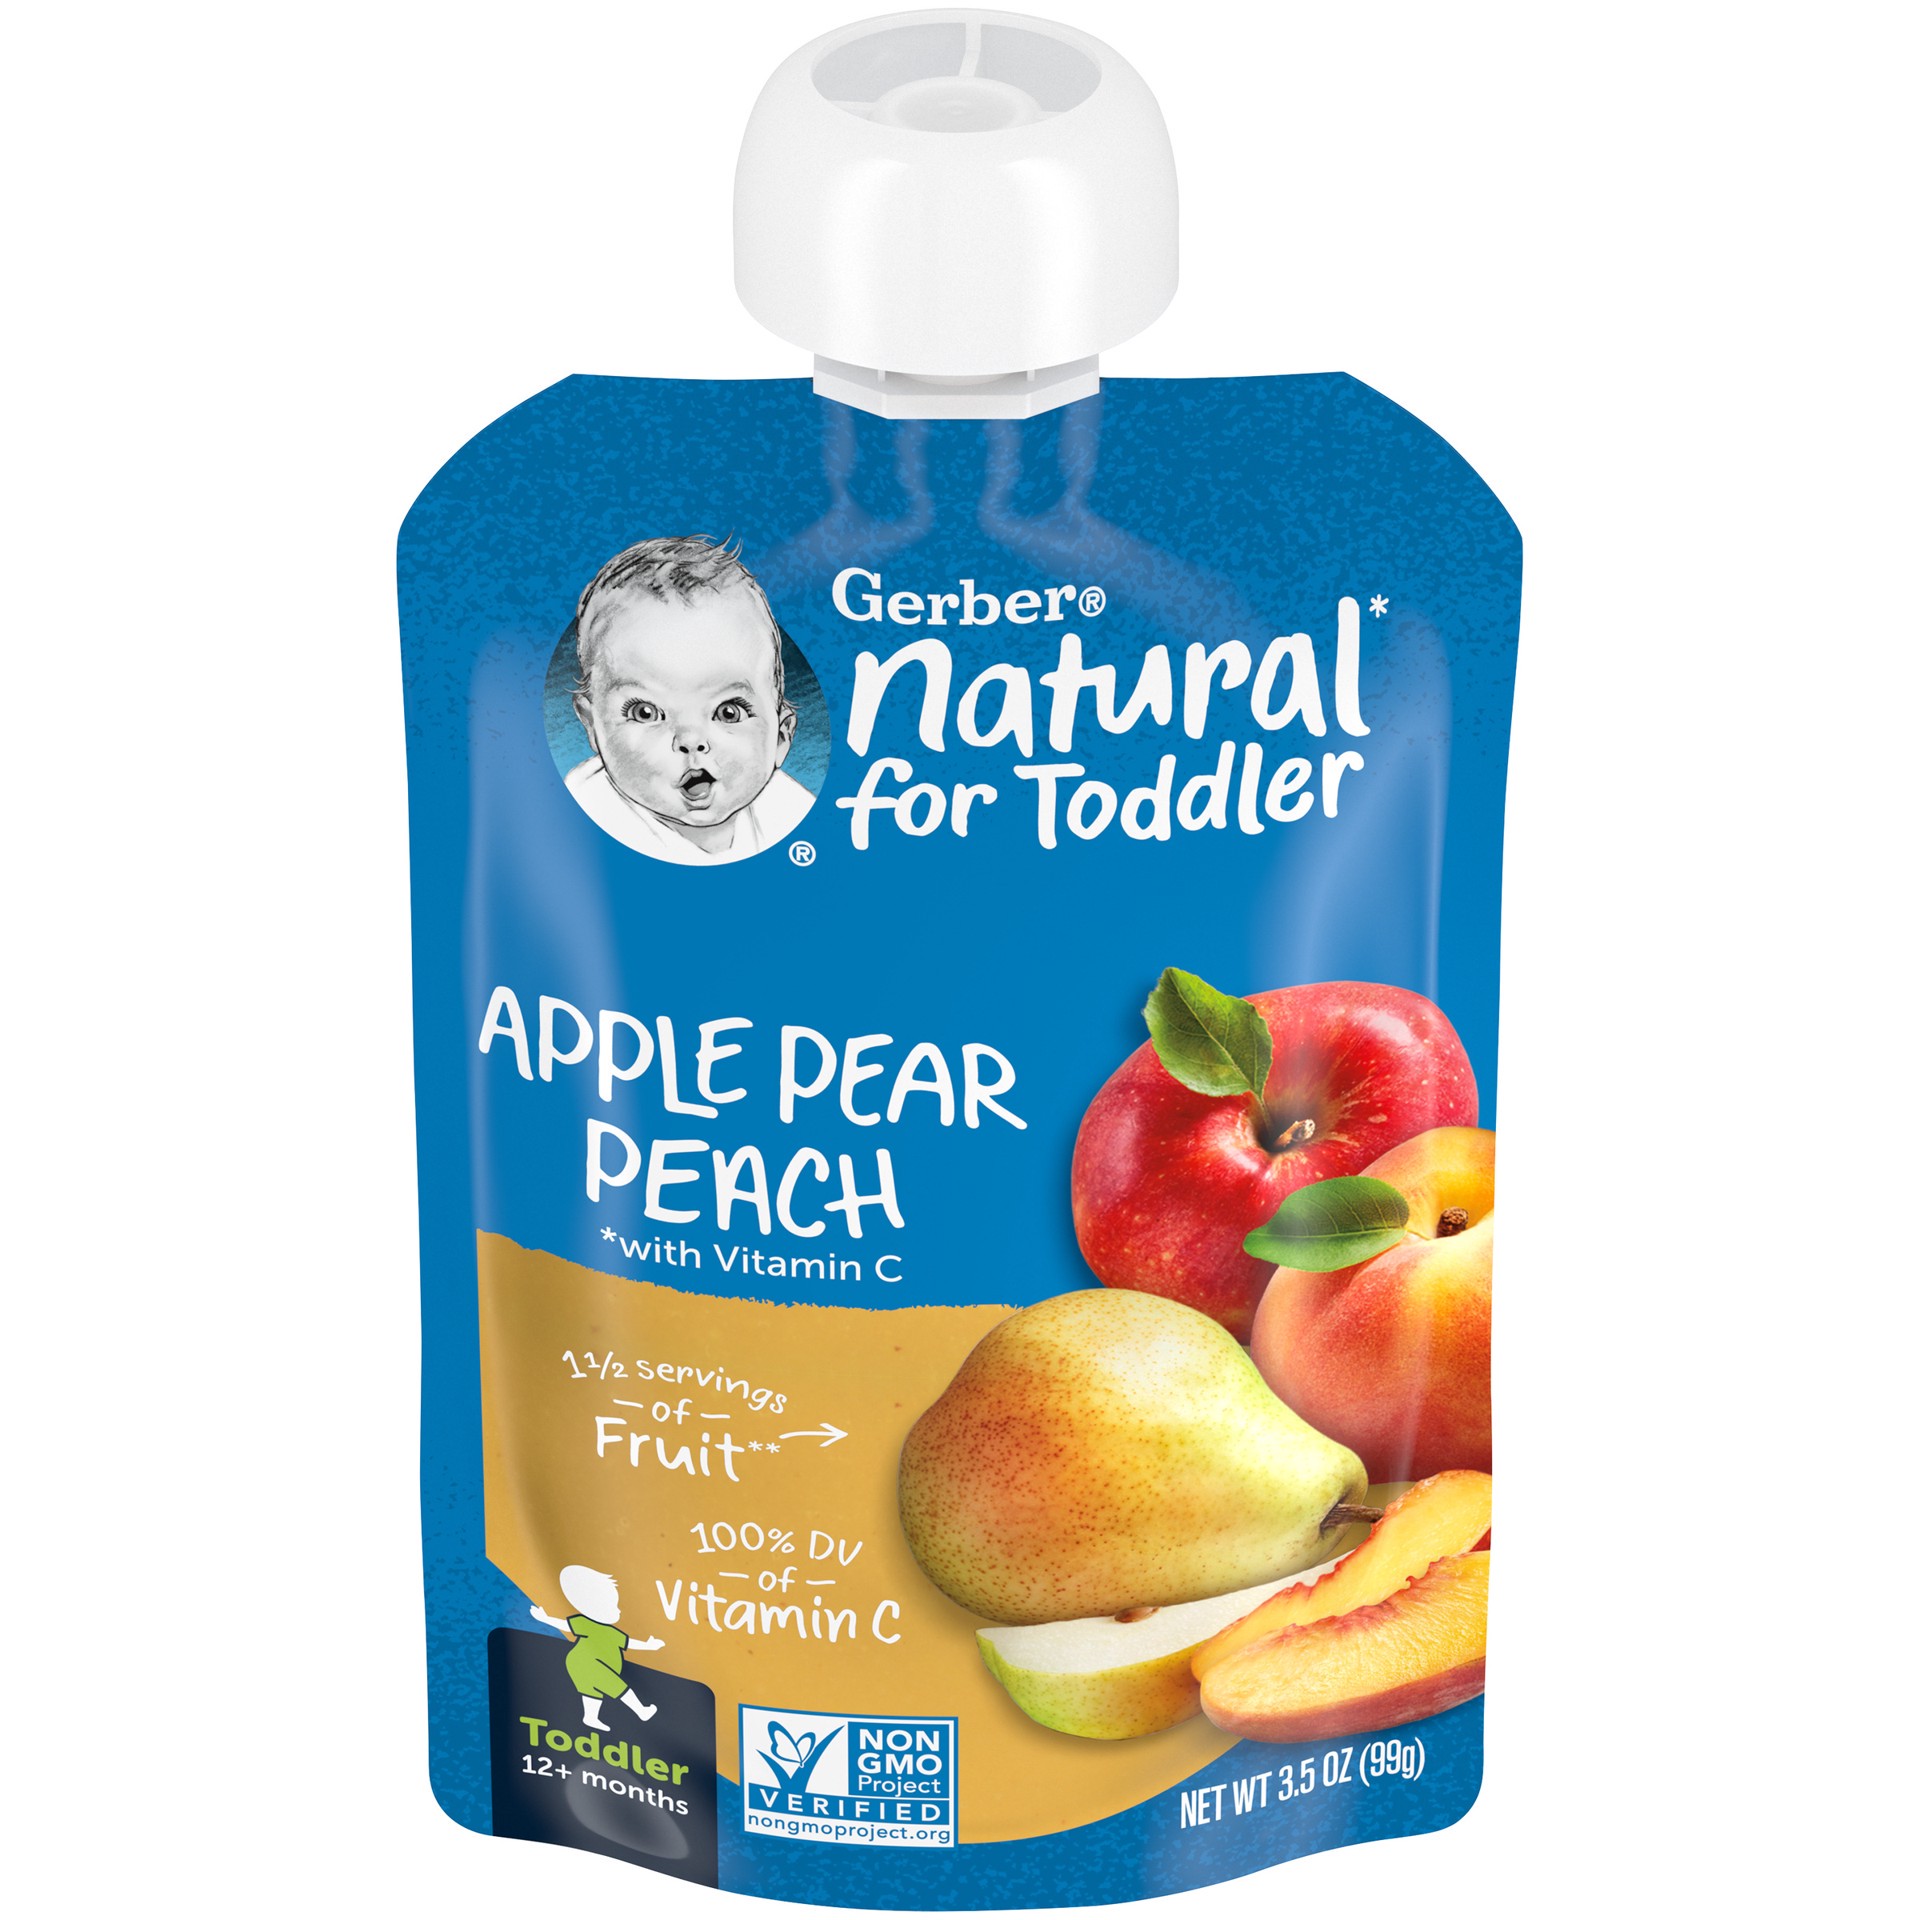 slide 1 of 9, Gerber Natural for Toddler, Apple Pear Peach Toddler Pouch, 3.5 oz Pouch, 3.5 oz